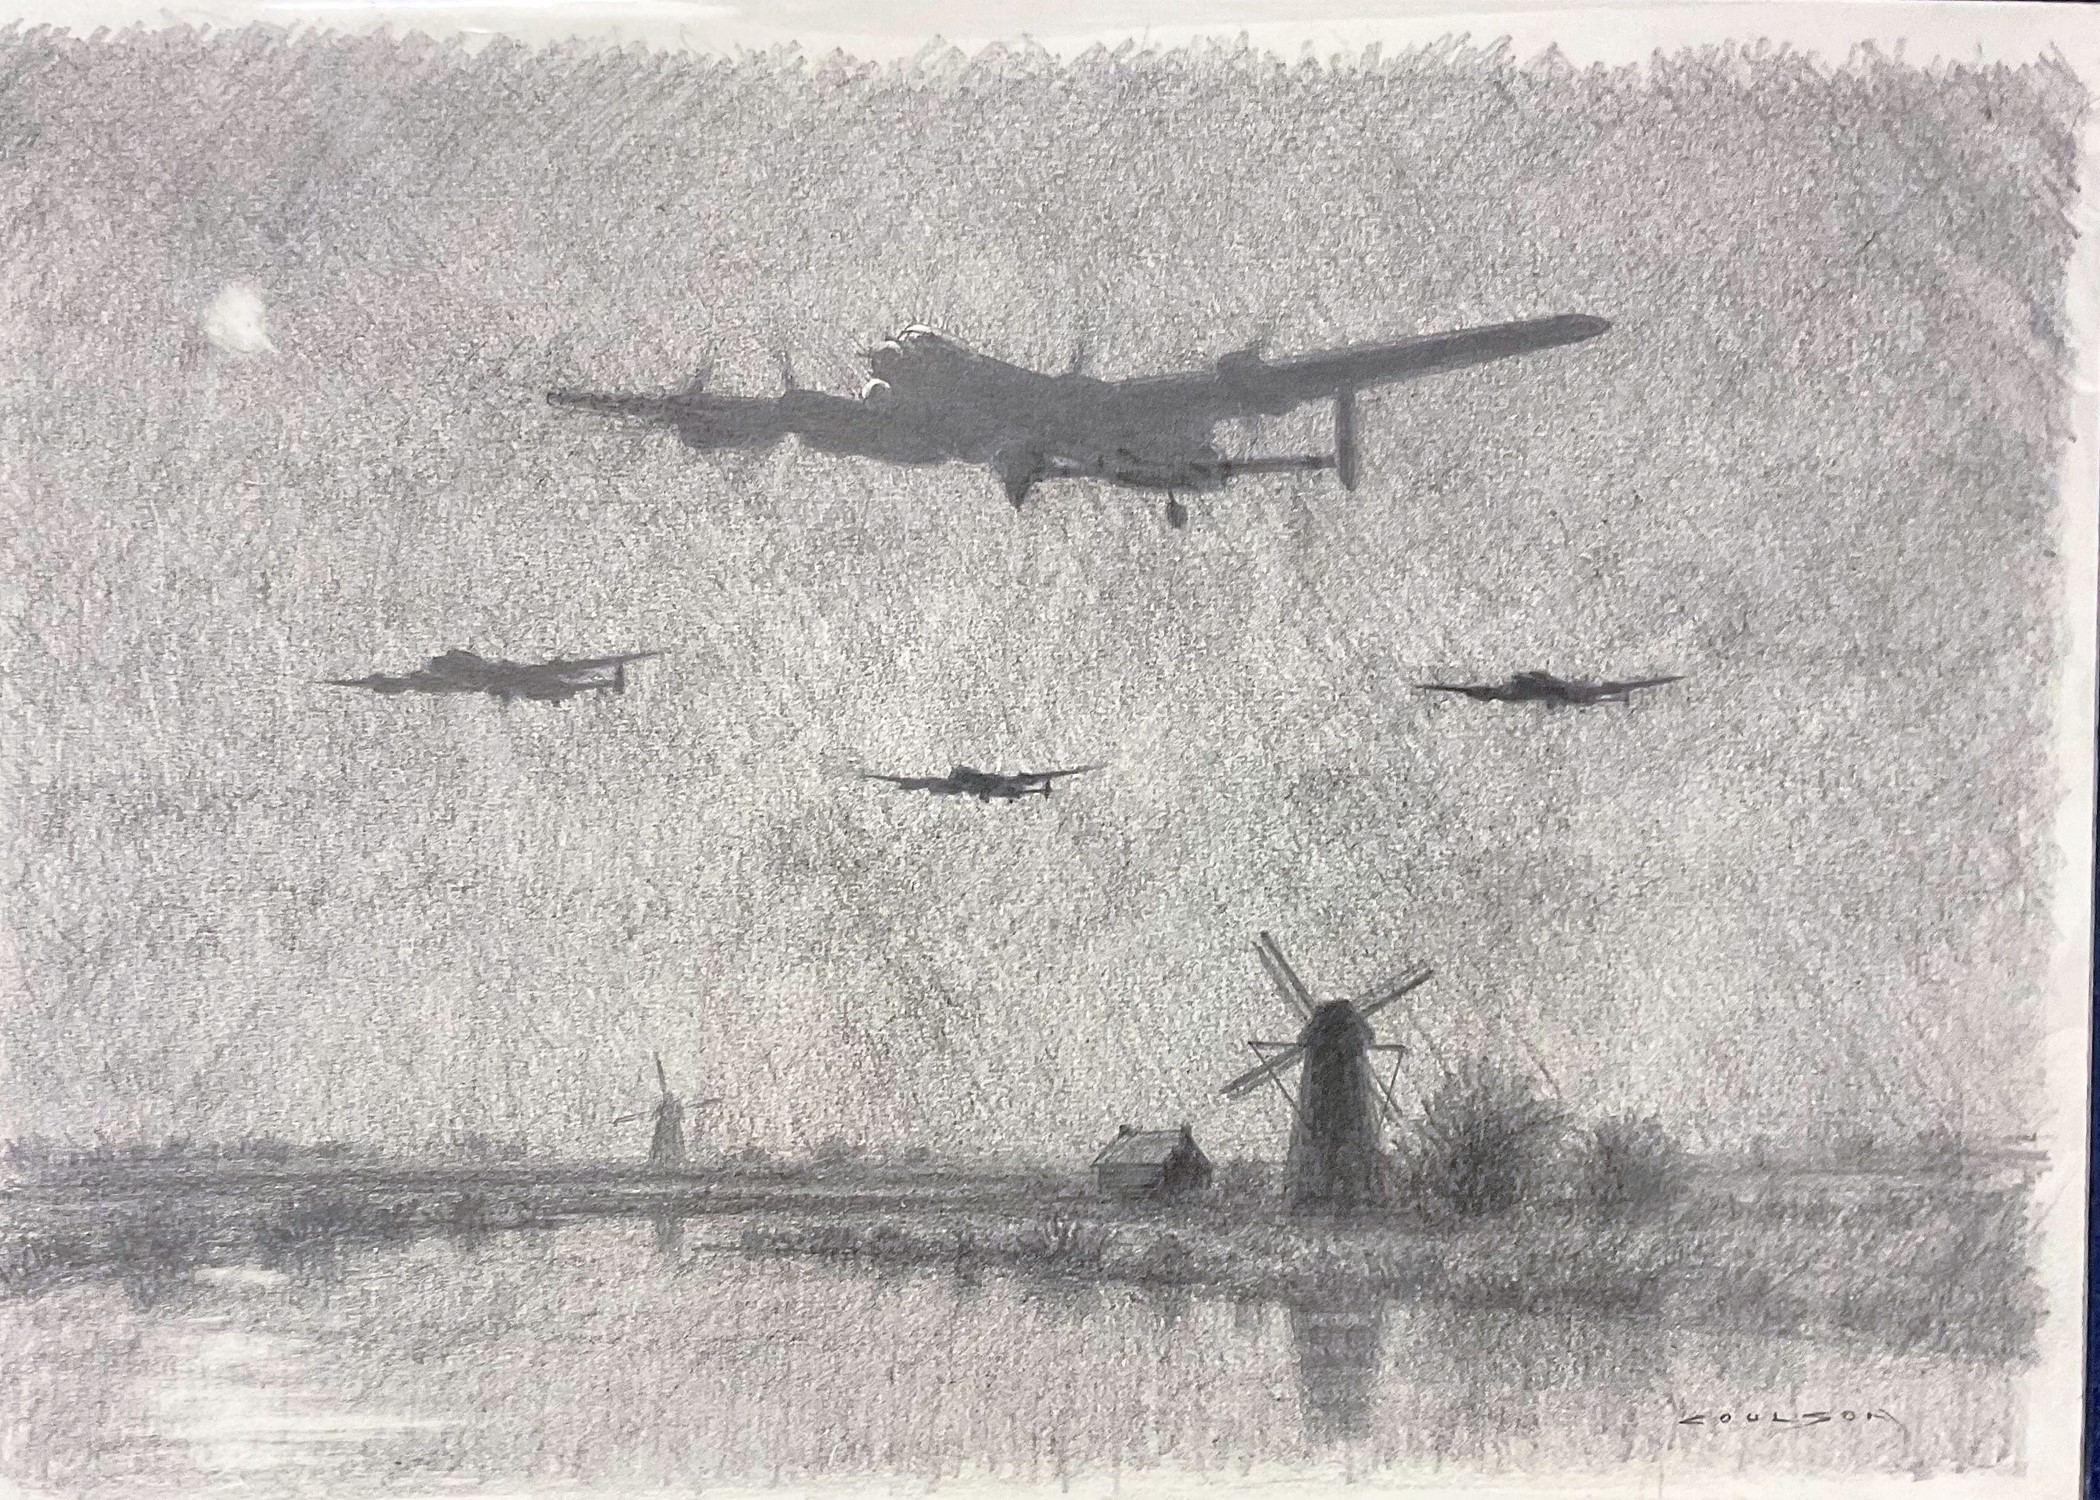 Aviation Artist Coulson Original Pencil Drawn drawing of Lancasters Dambusters in Flight over